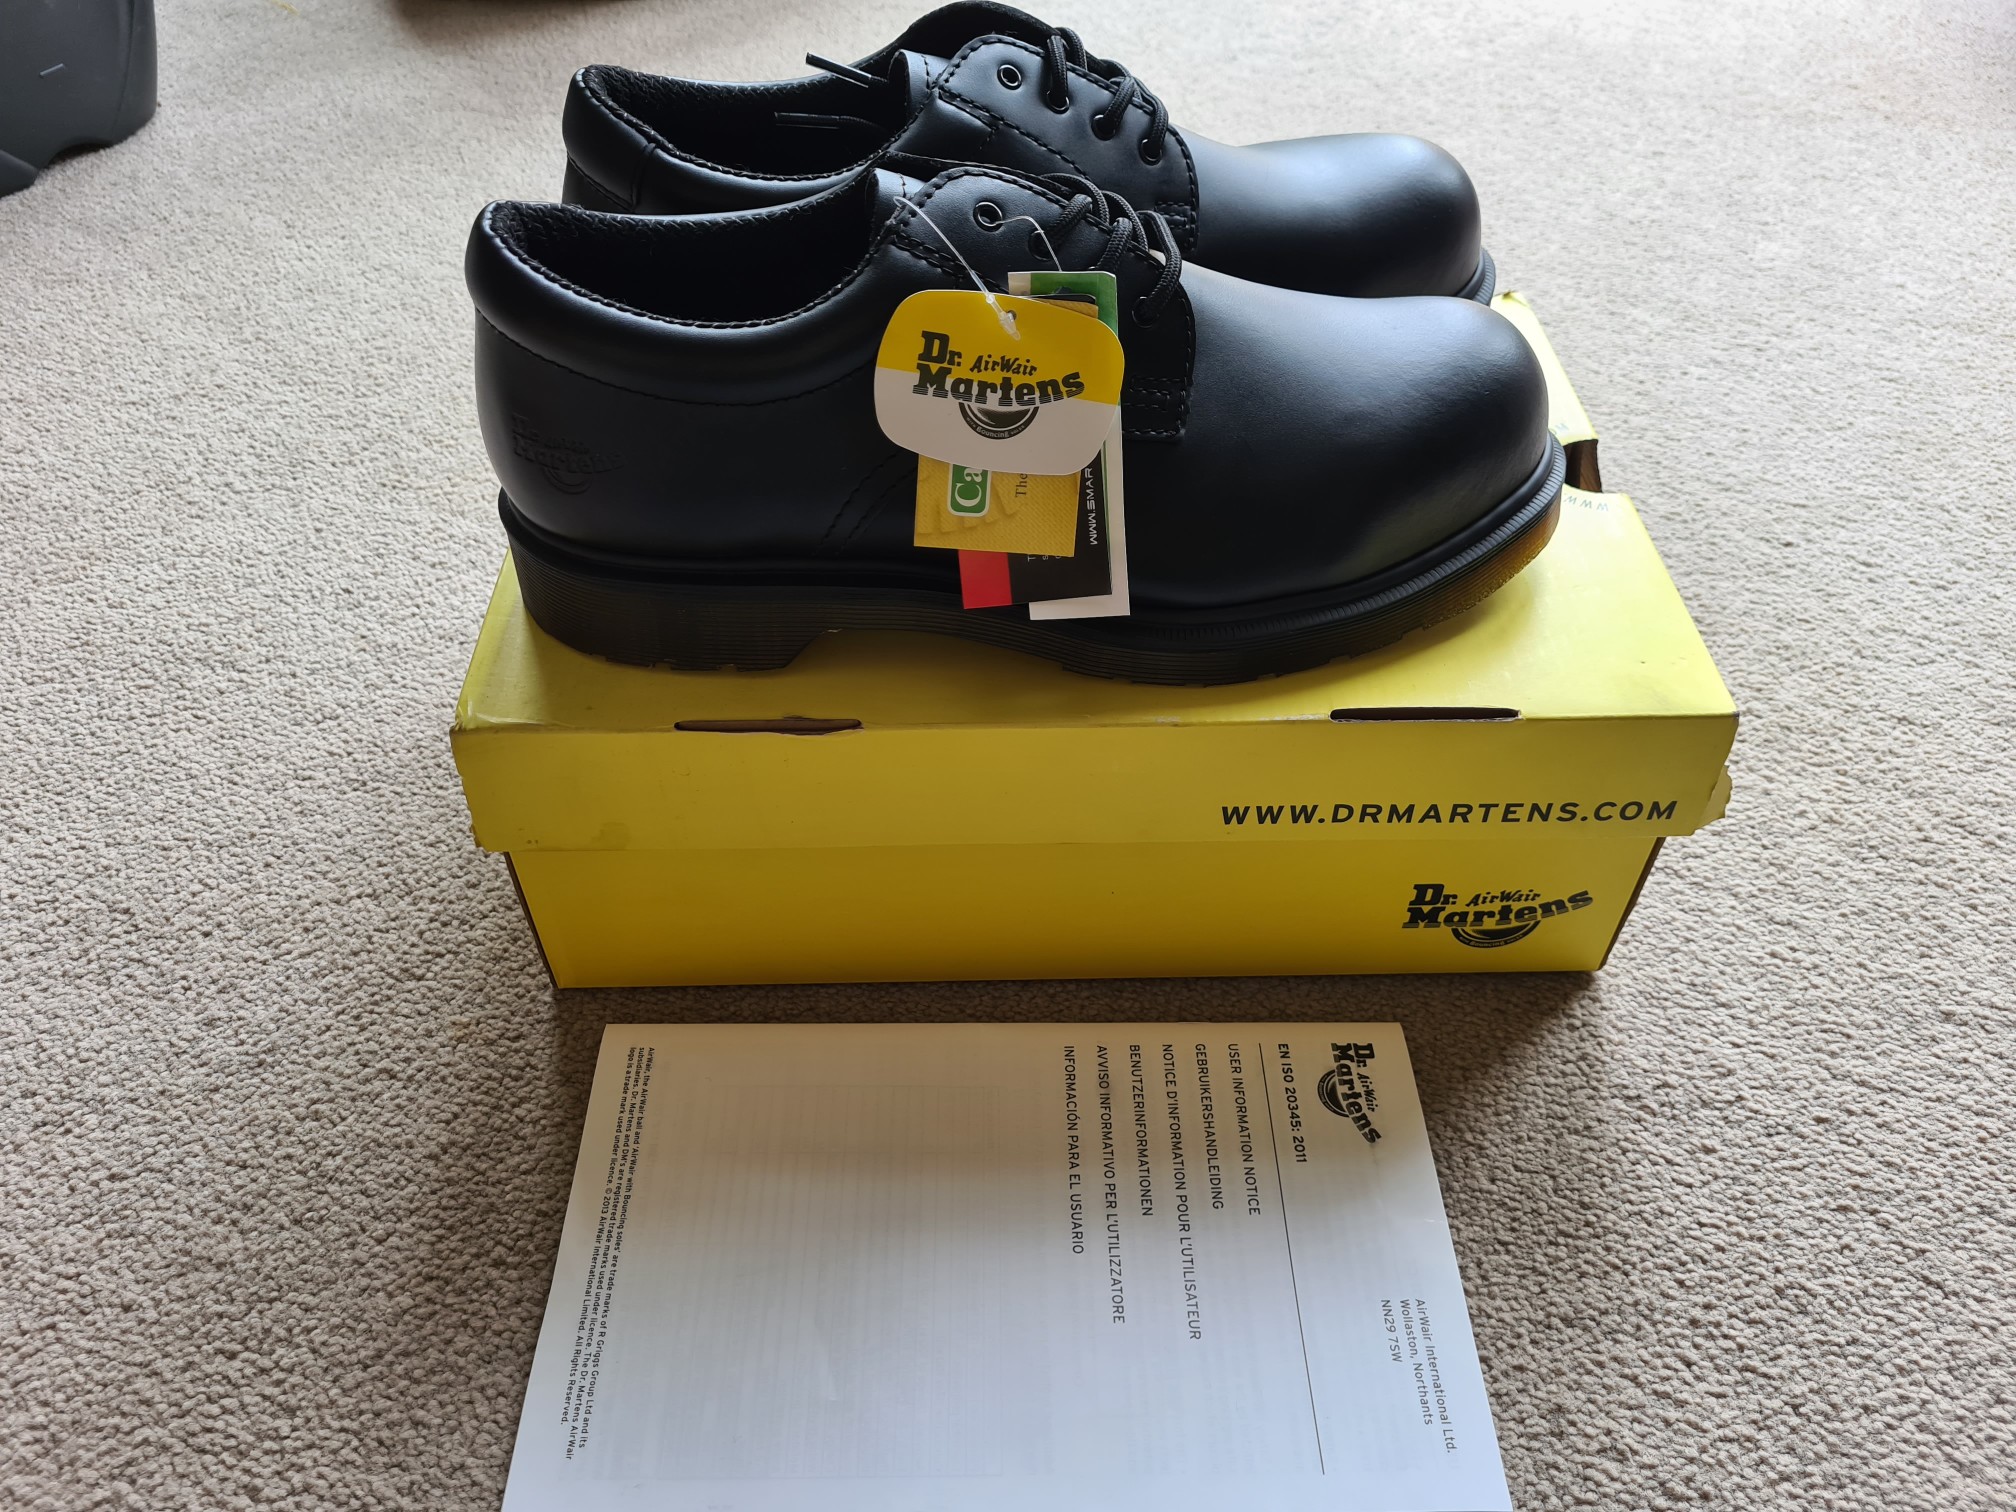 second hand dr martens size 9 - Local 